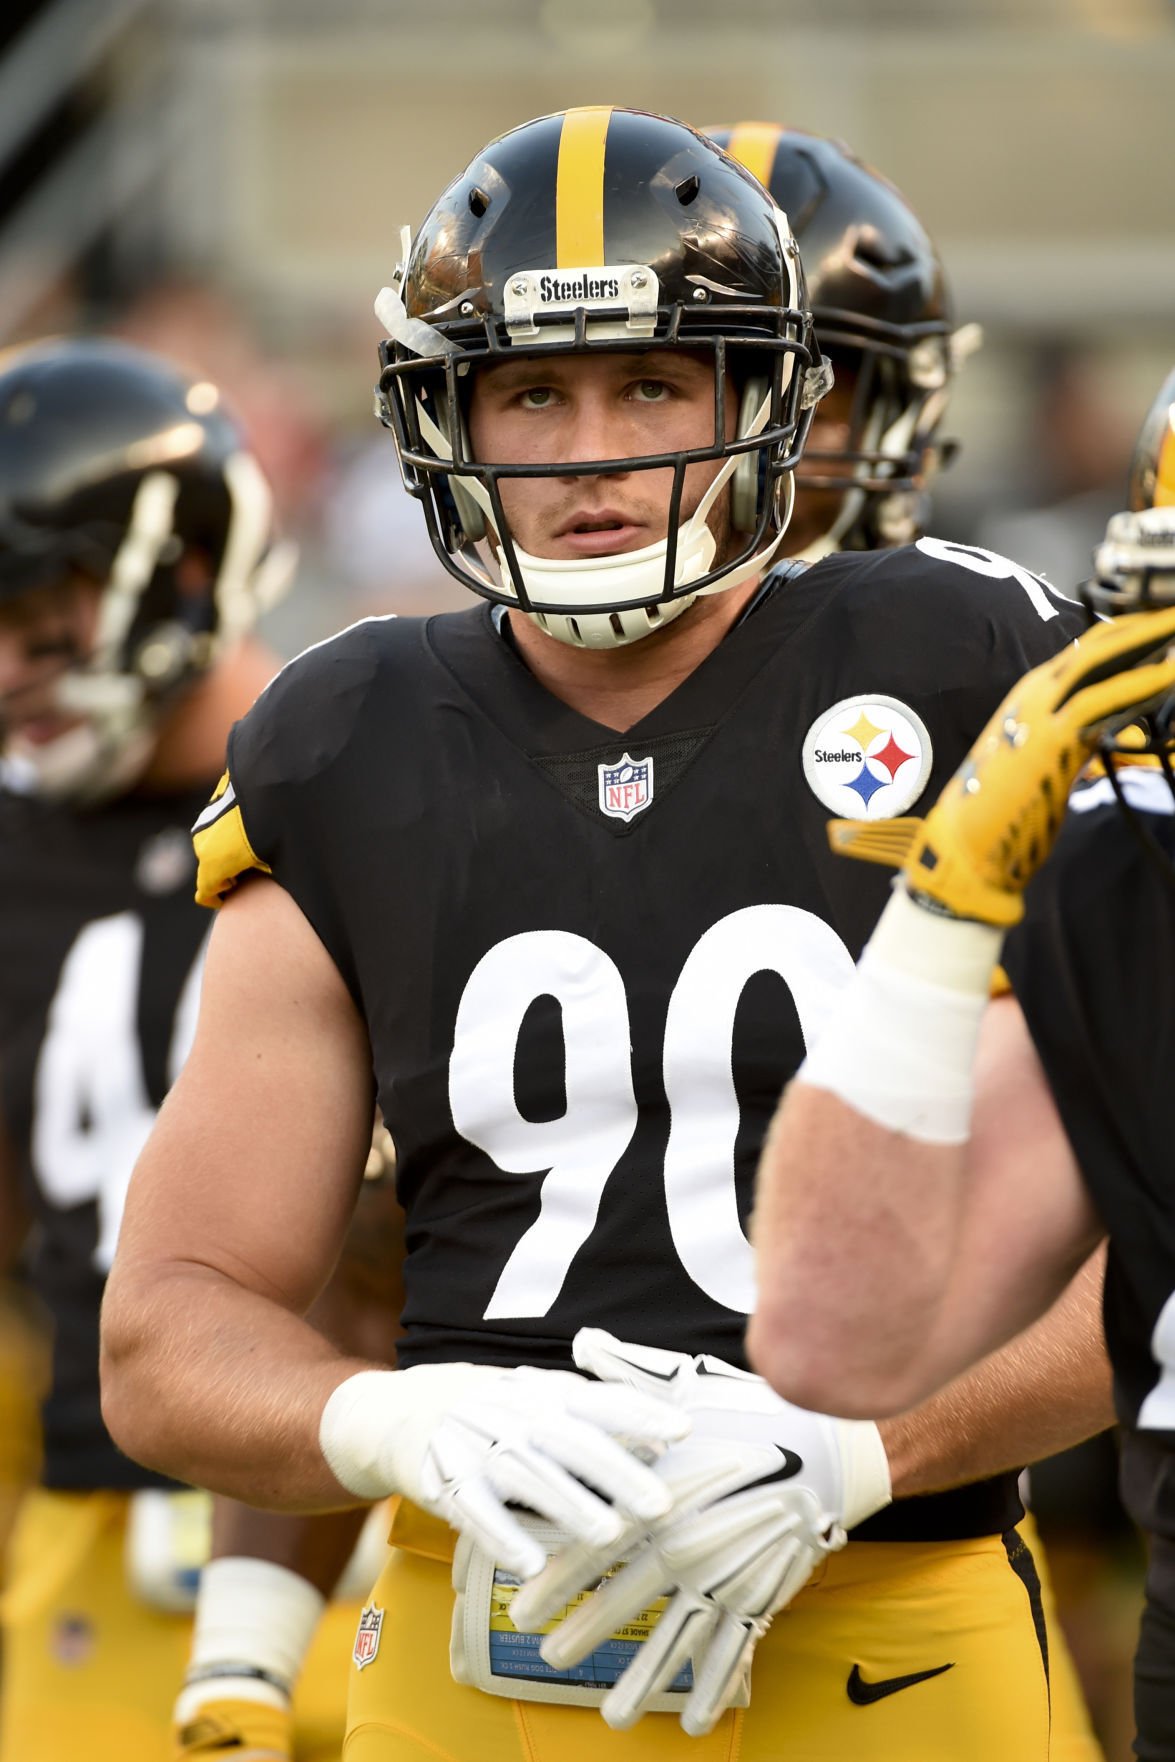 NFL: Former Badger T.J. Watt jumps into starting gig with Steelers | Pro football ...